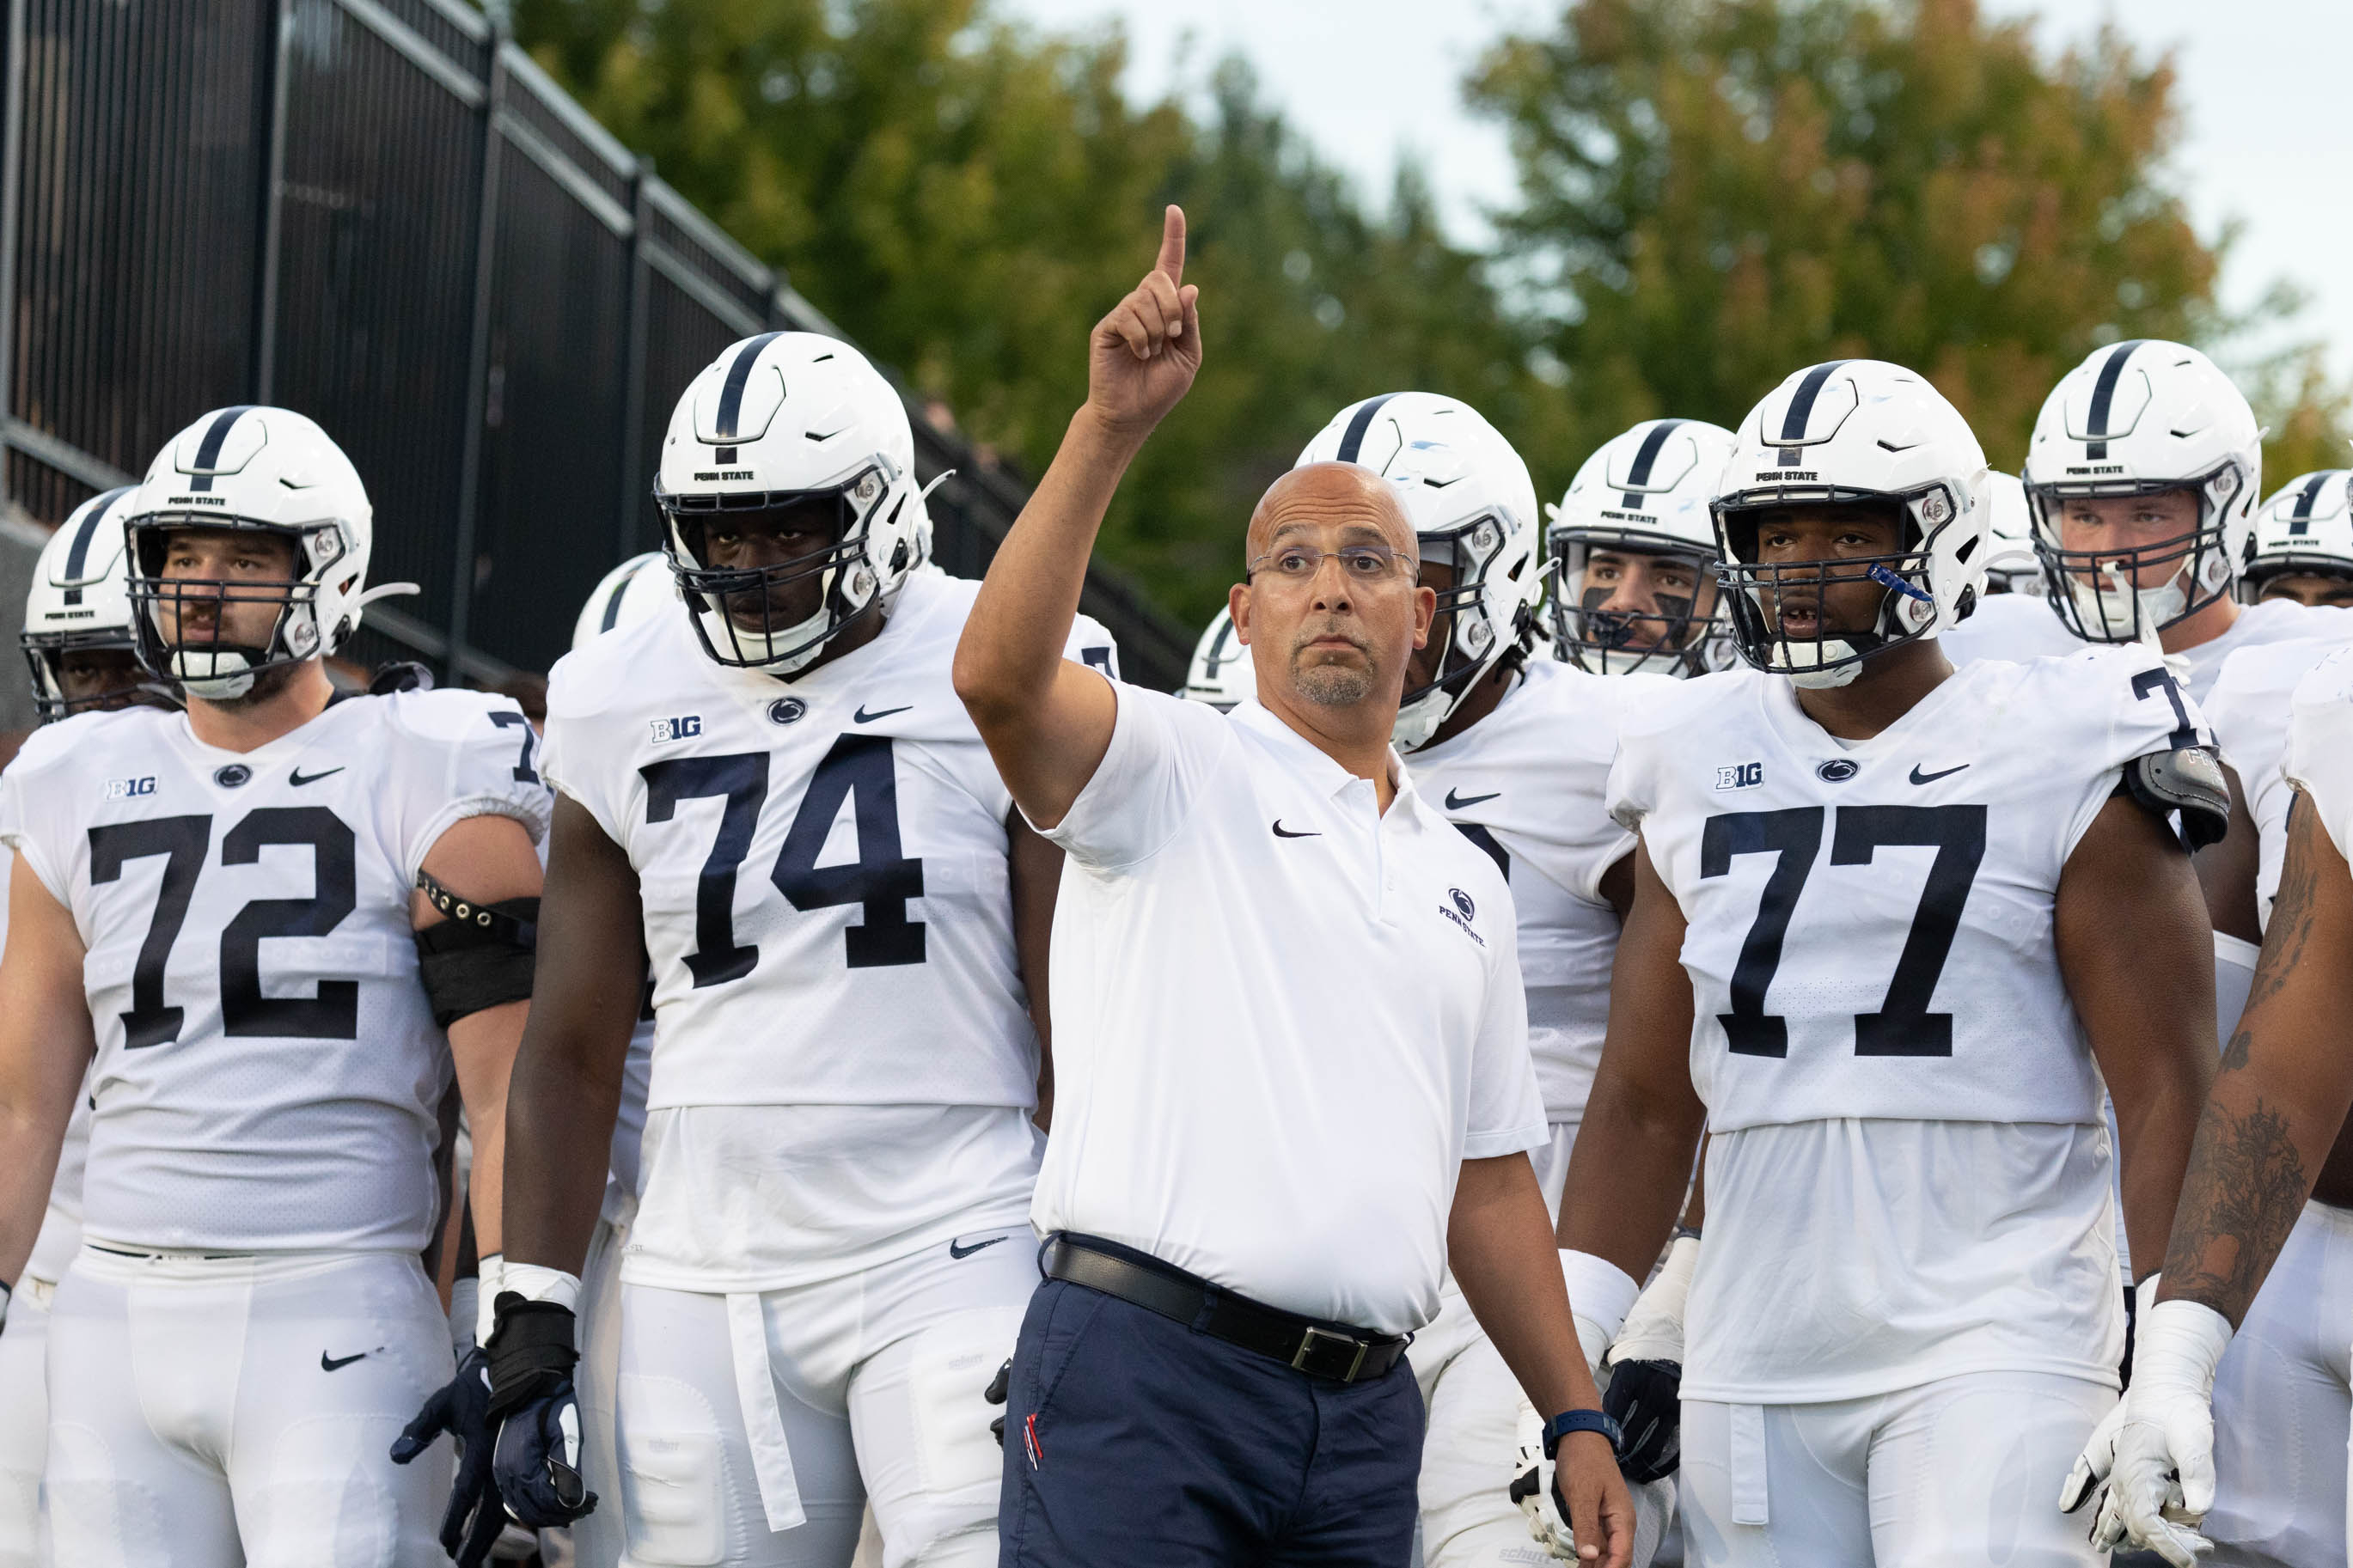 James Franklin hints at logistical adjustment to Penn State’s gameday routine for trip to Auburn